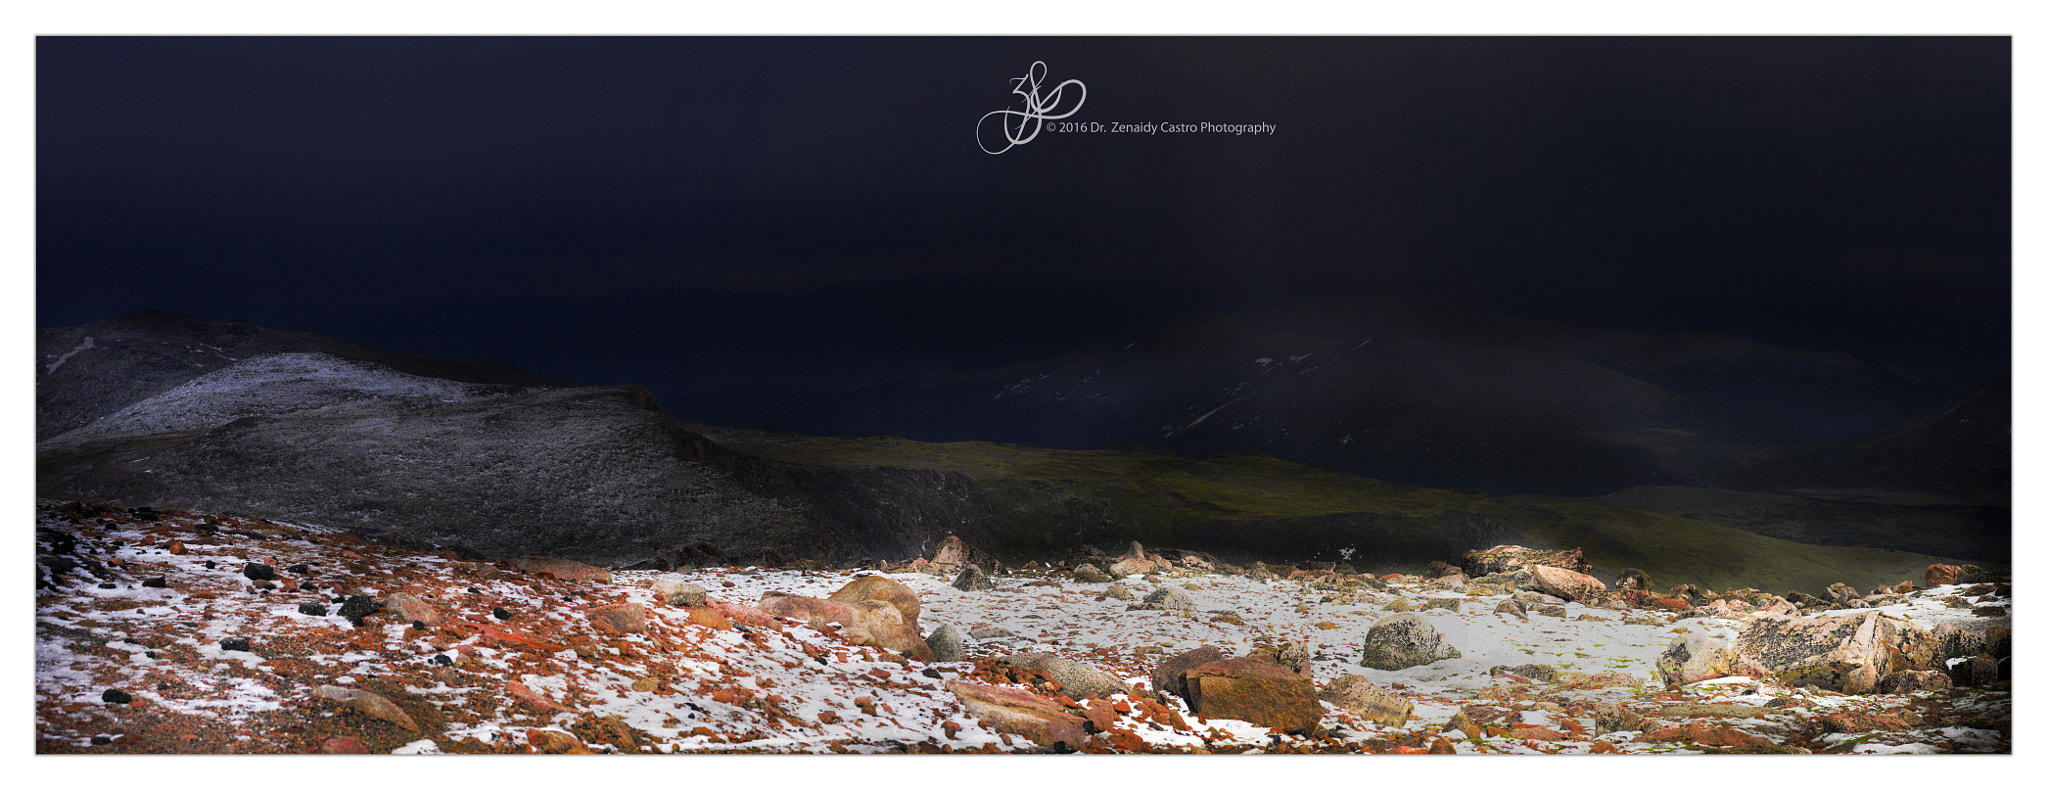 Phase One IQ150 + Schneider LS 80mm f/2.8 sample photo. Dark stormy clouds at the summit of mount evans photography